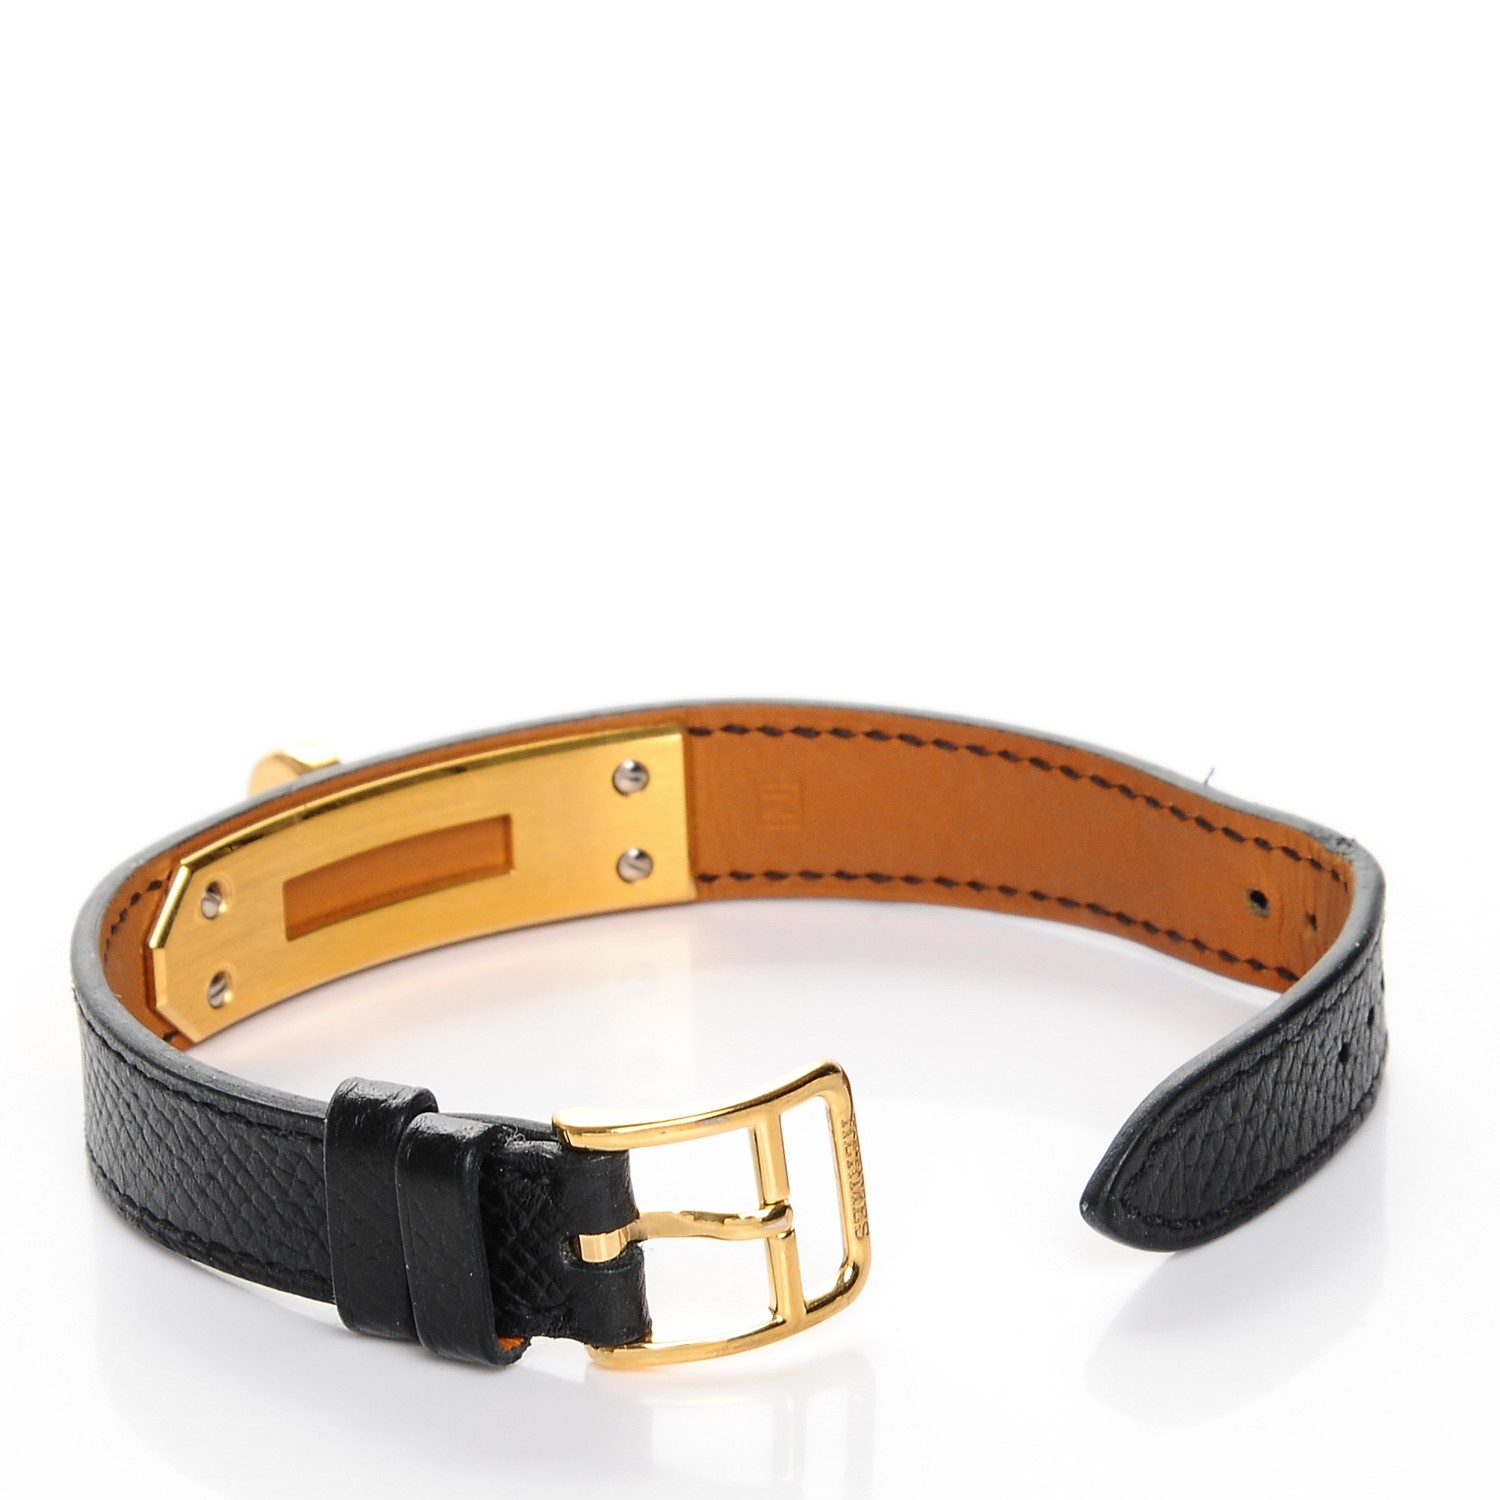 HERMES Epsom Kelly Watch Replacement Strap Band Black 193163